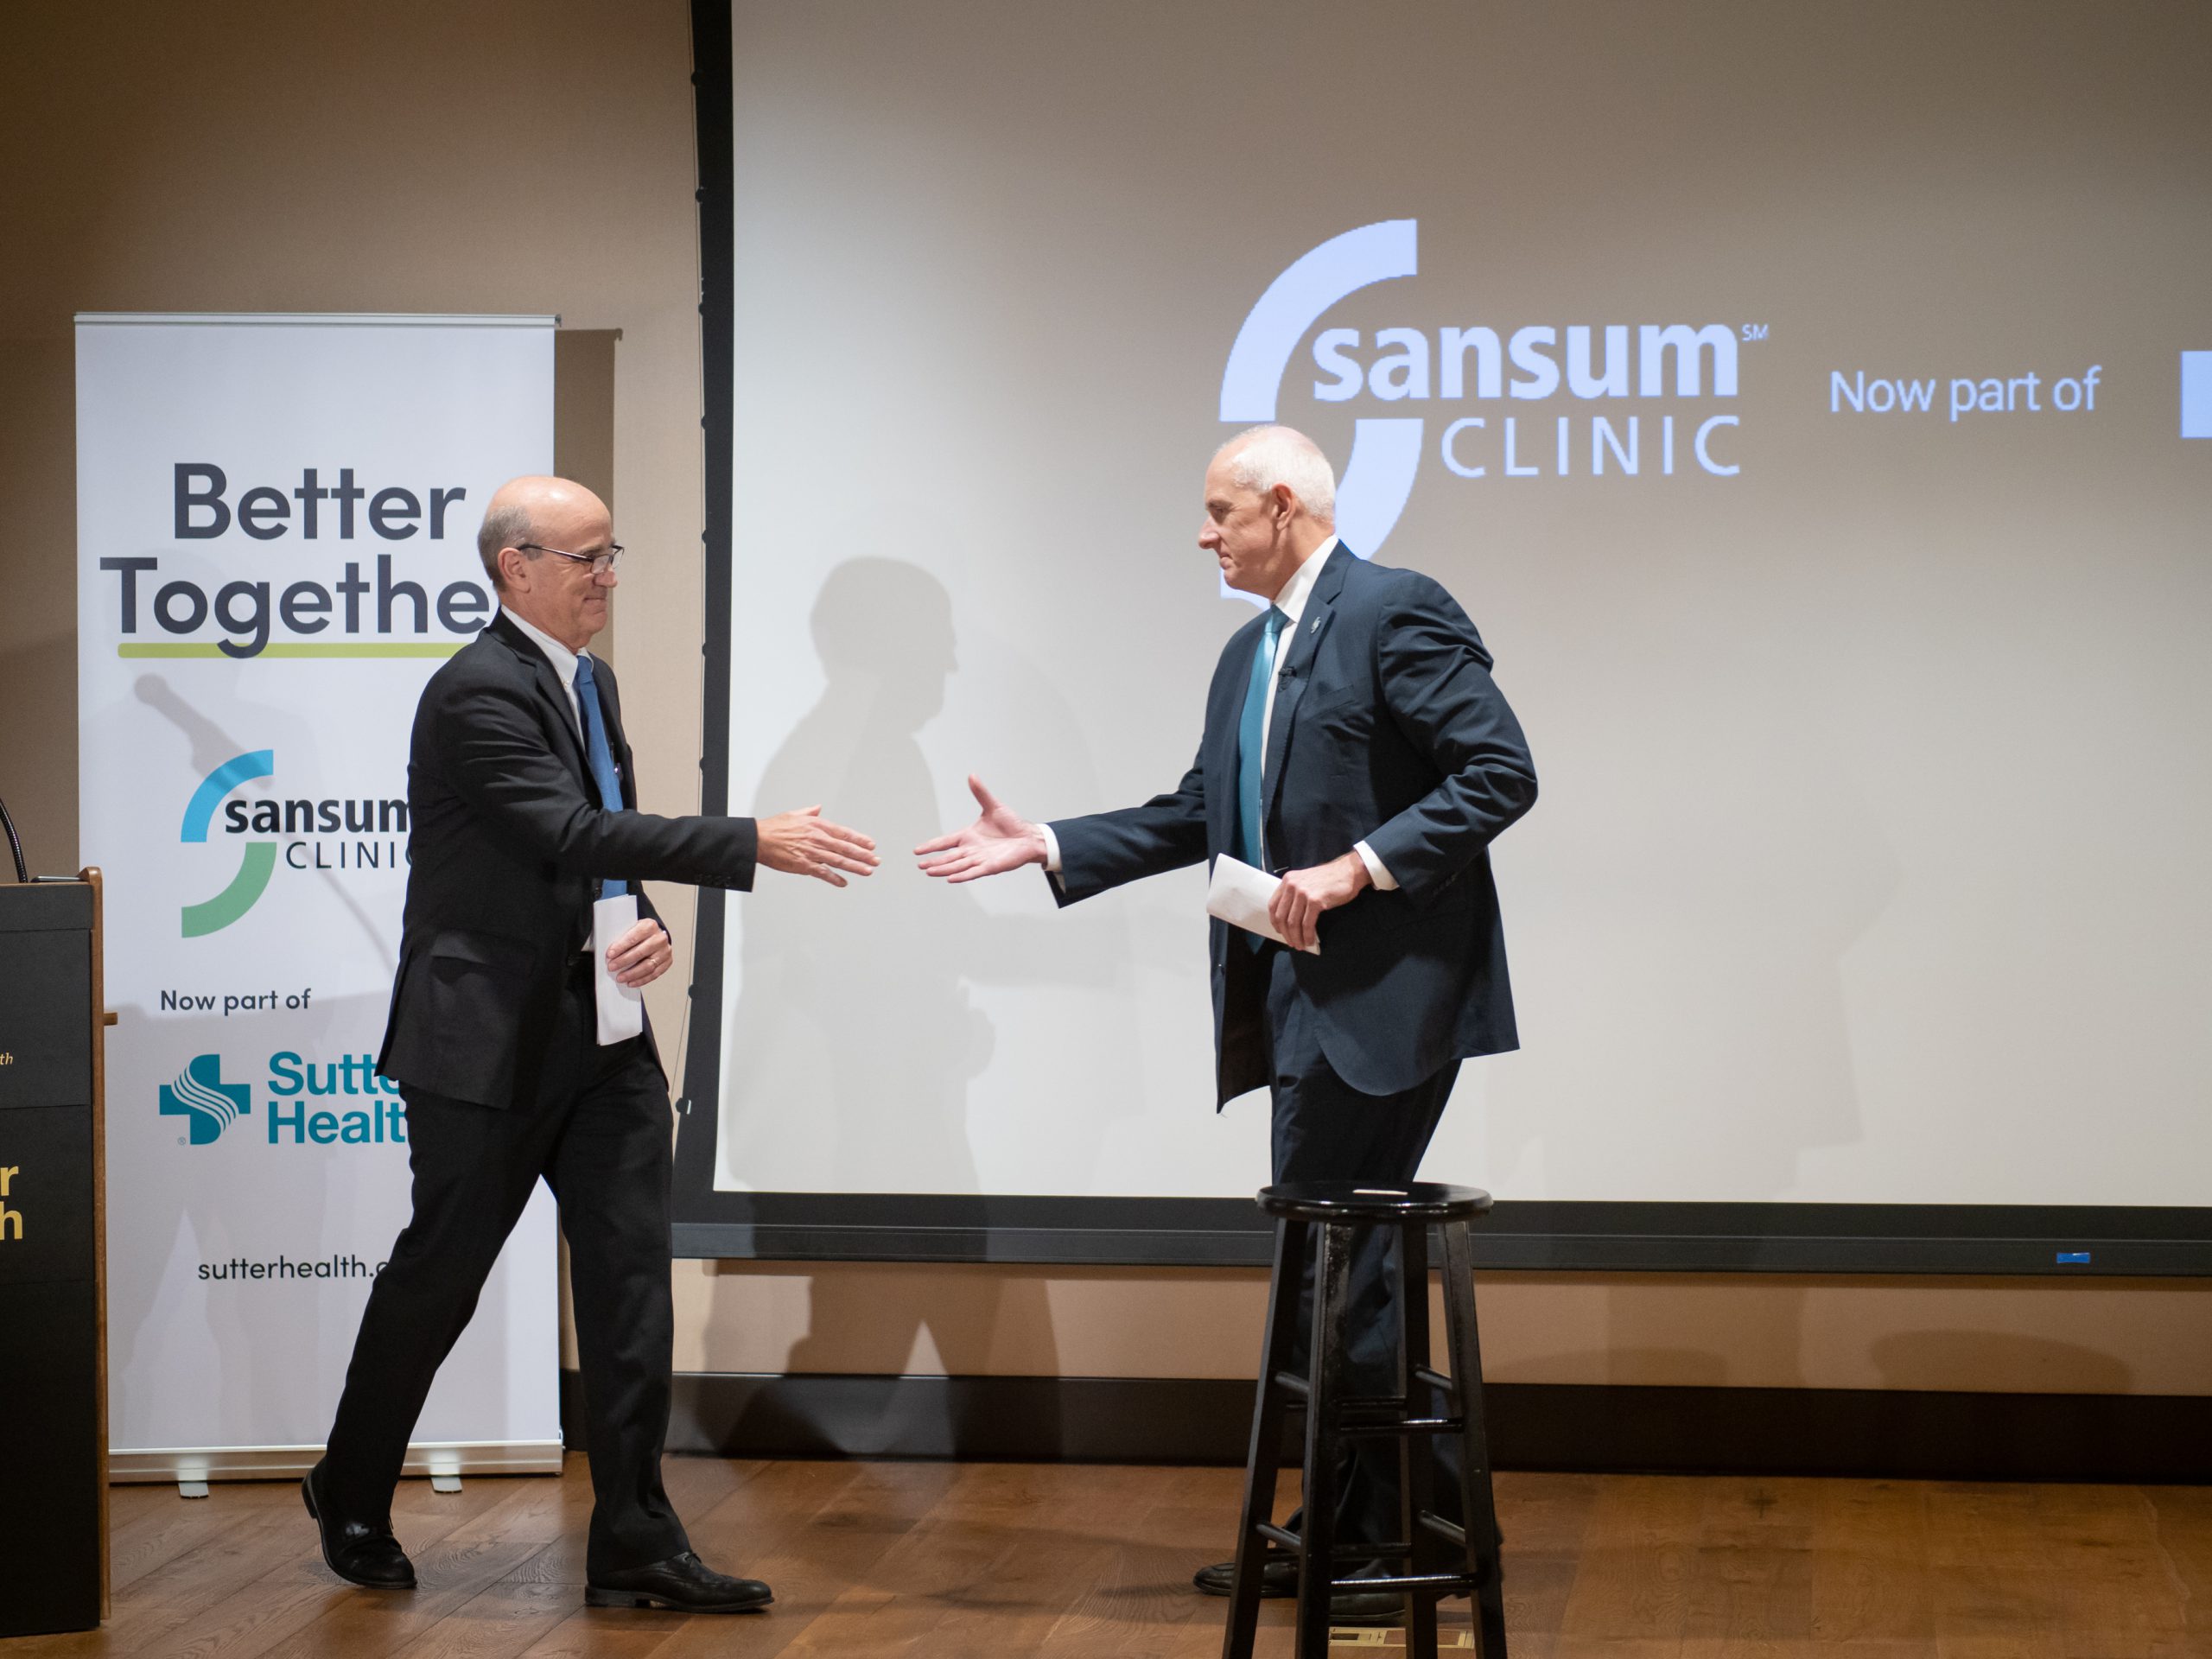 1. Kurt N. Ransohoff, MD, FACP, CEO and Chief Medical Officer, Sansum Clinic and Warner L. Thomas, President and CEO, Sutter Health, shake hands at the signing ceremony